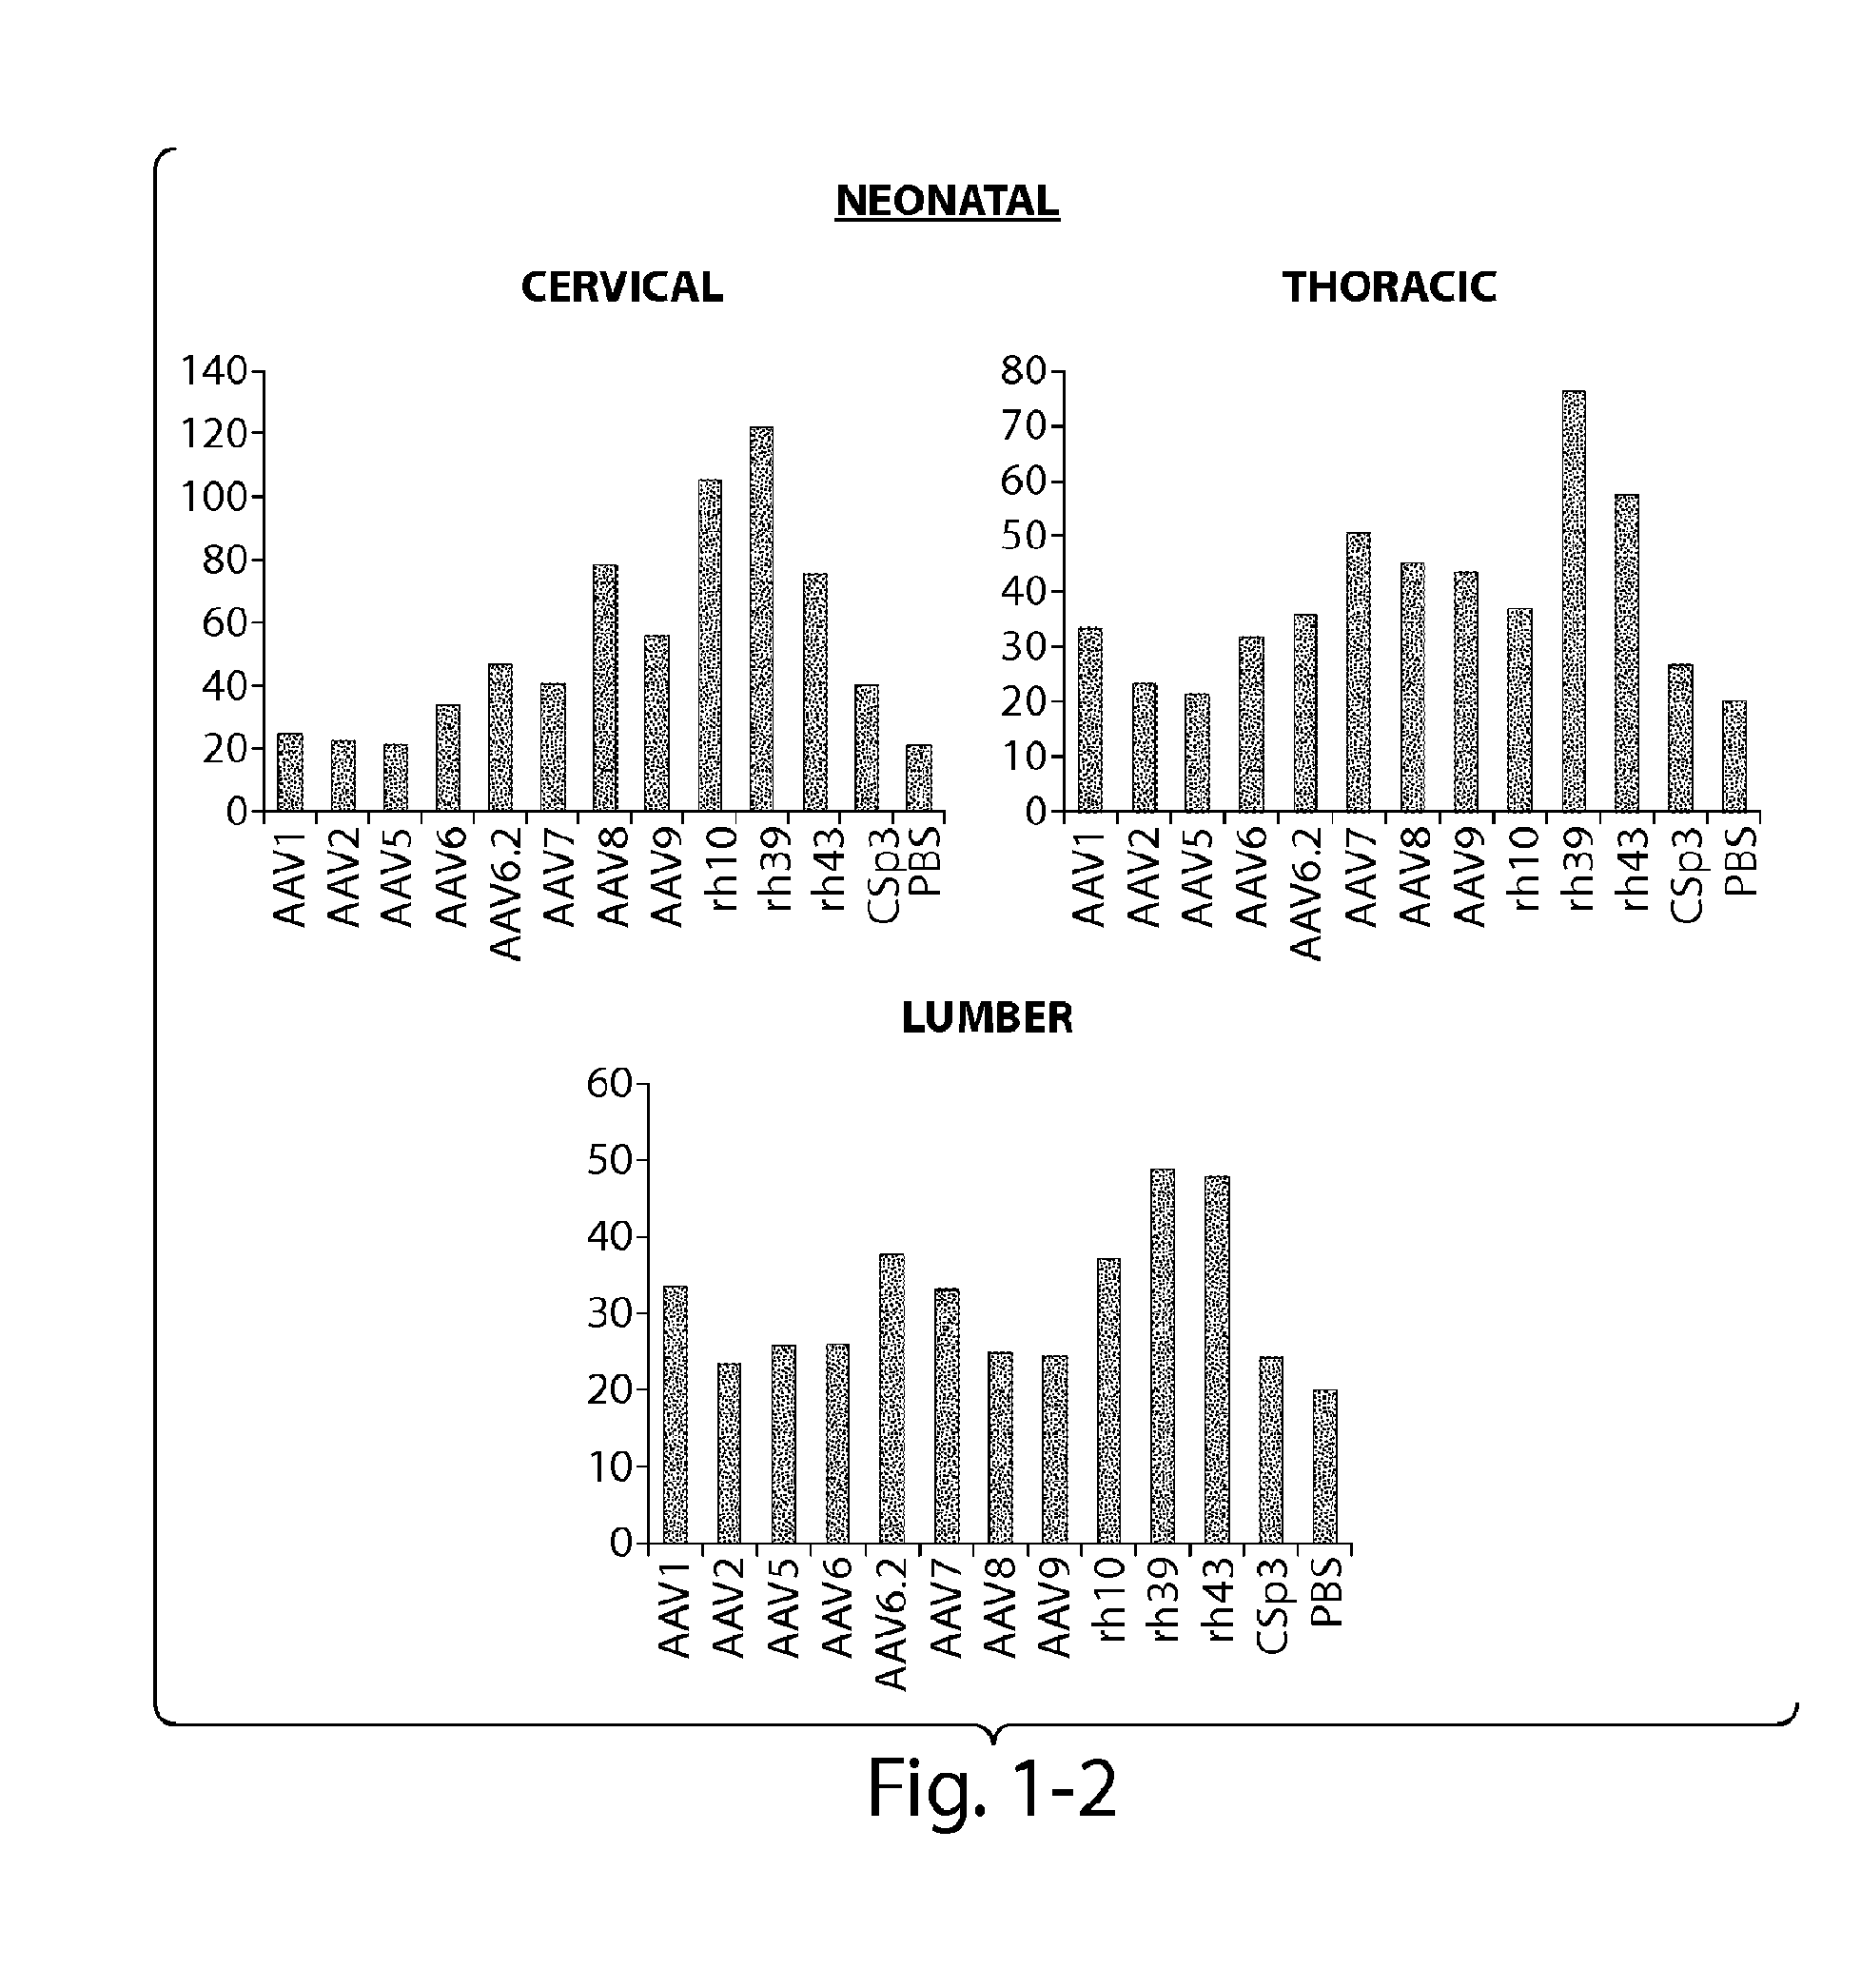 CNS targeting aav vectors and methods of use thereof